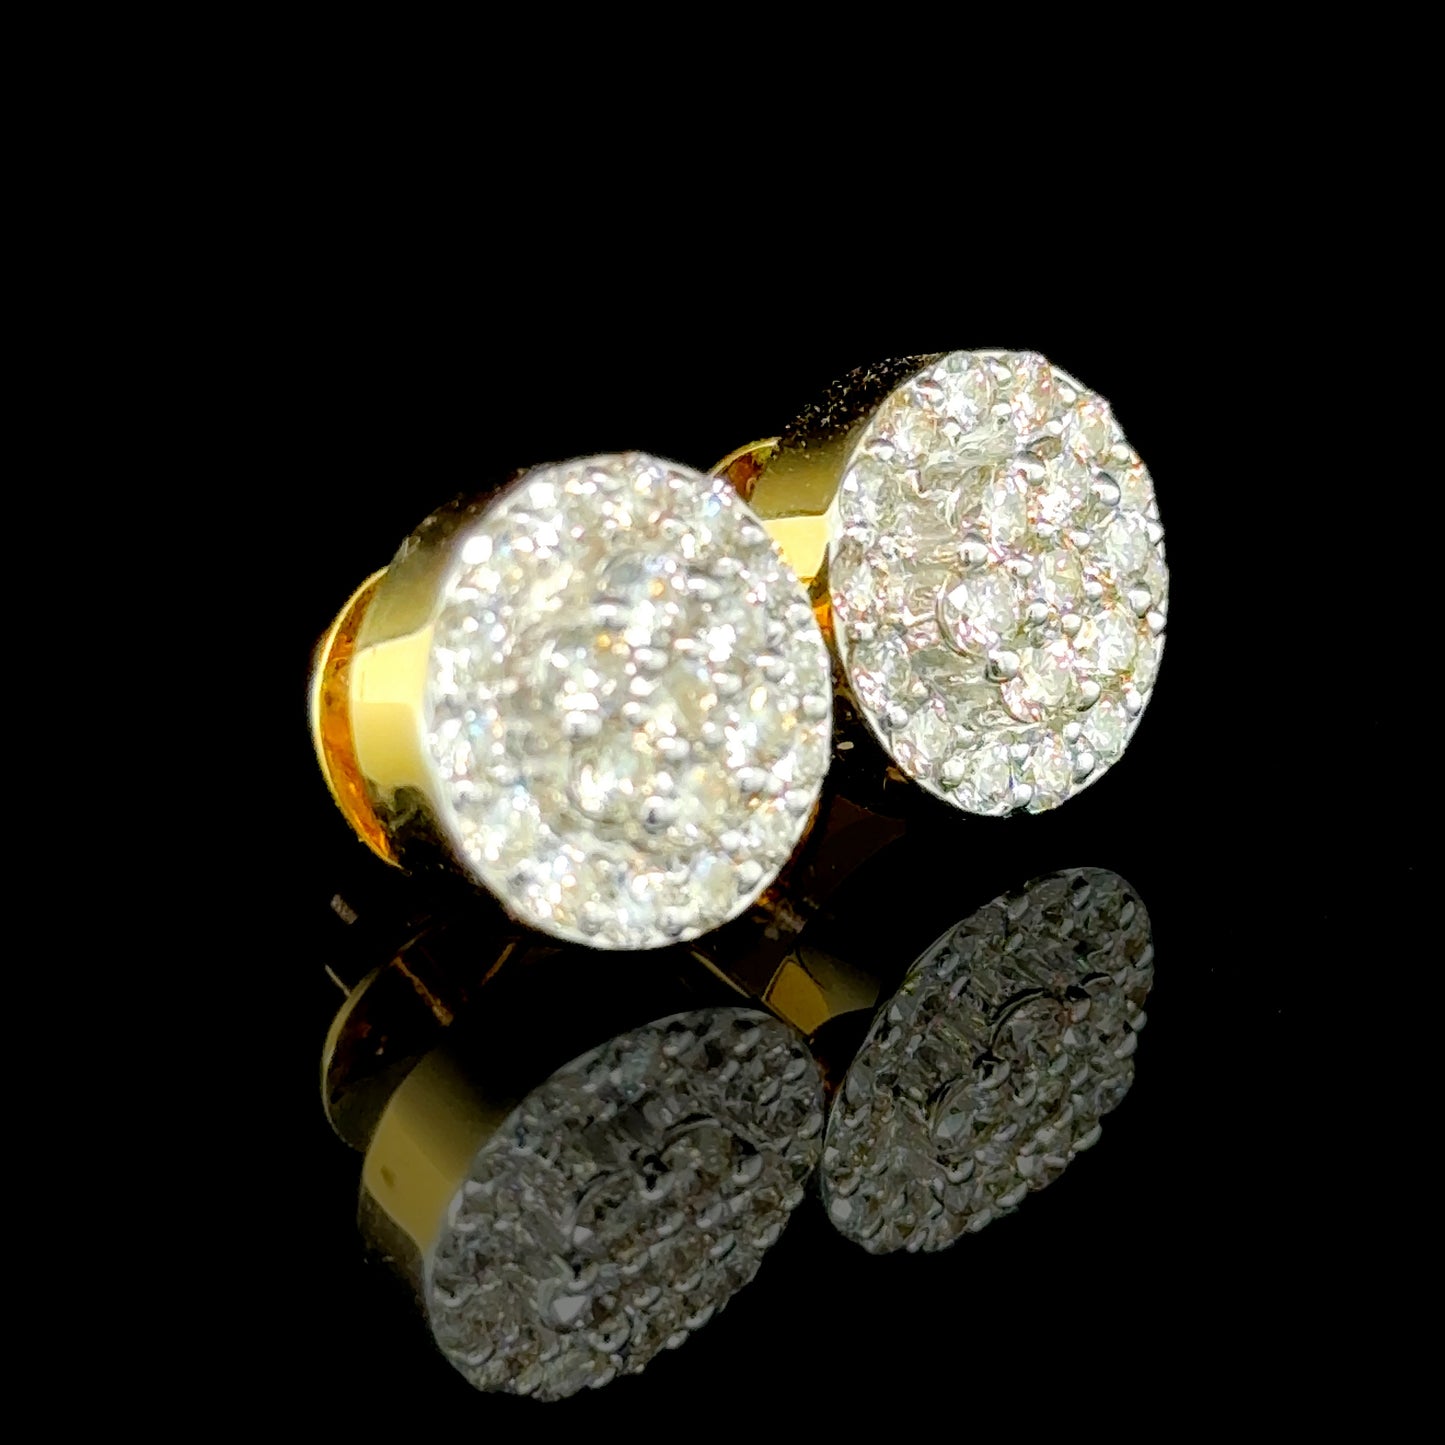 10K yellow gold earrings with a dazzling 1.97 carats of diamonds